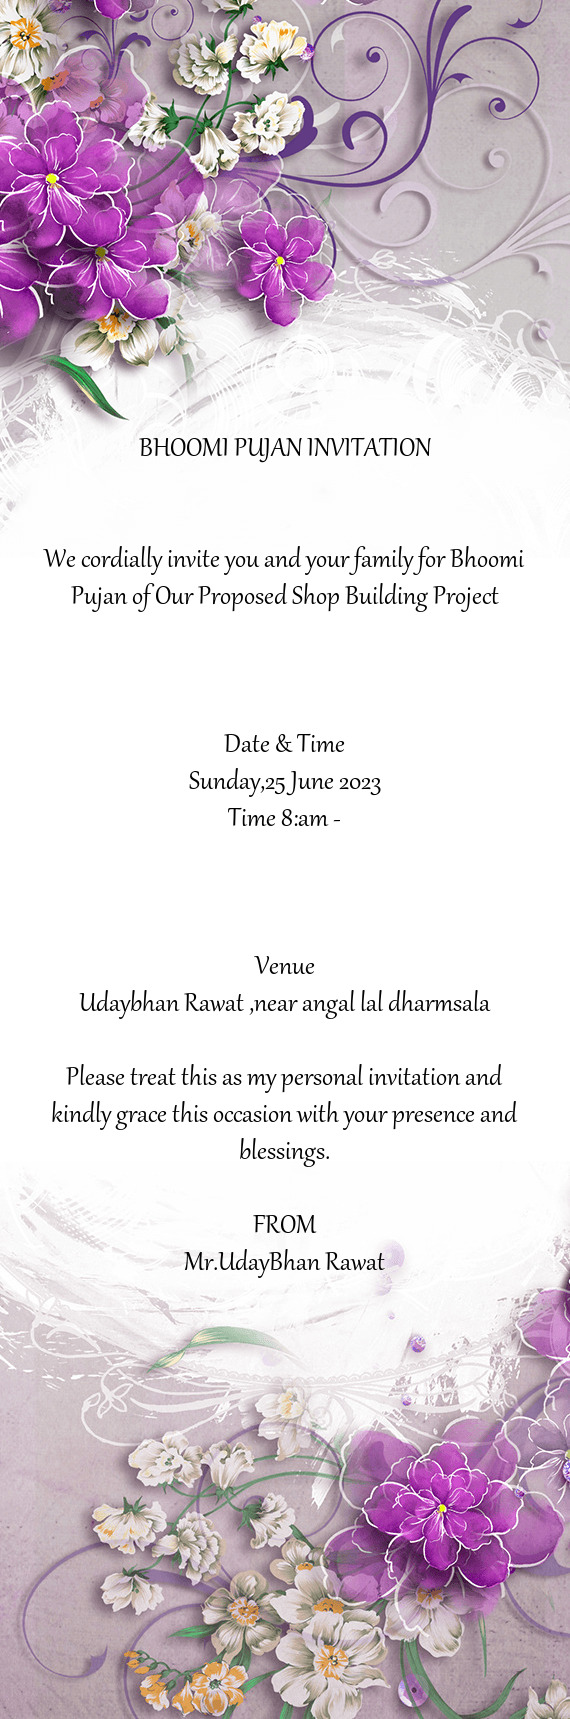 We cordially invite you and your family for Bhoomi Pujan of Our Proposed Shop Building Project